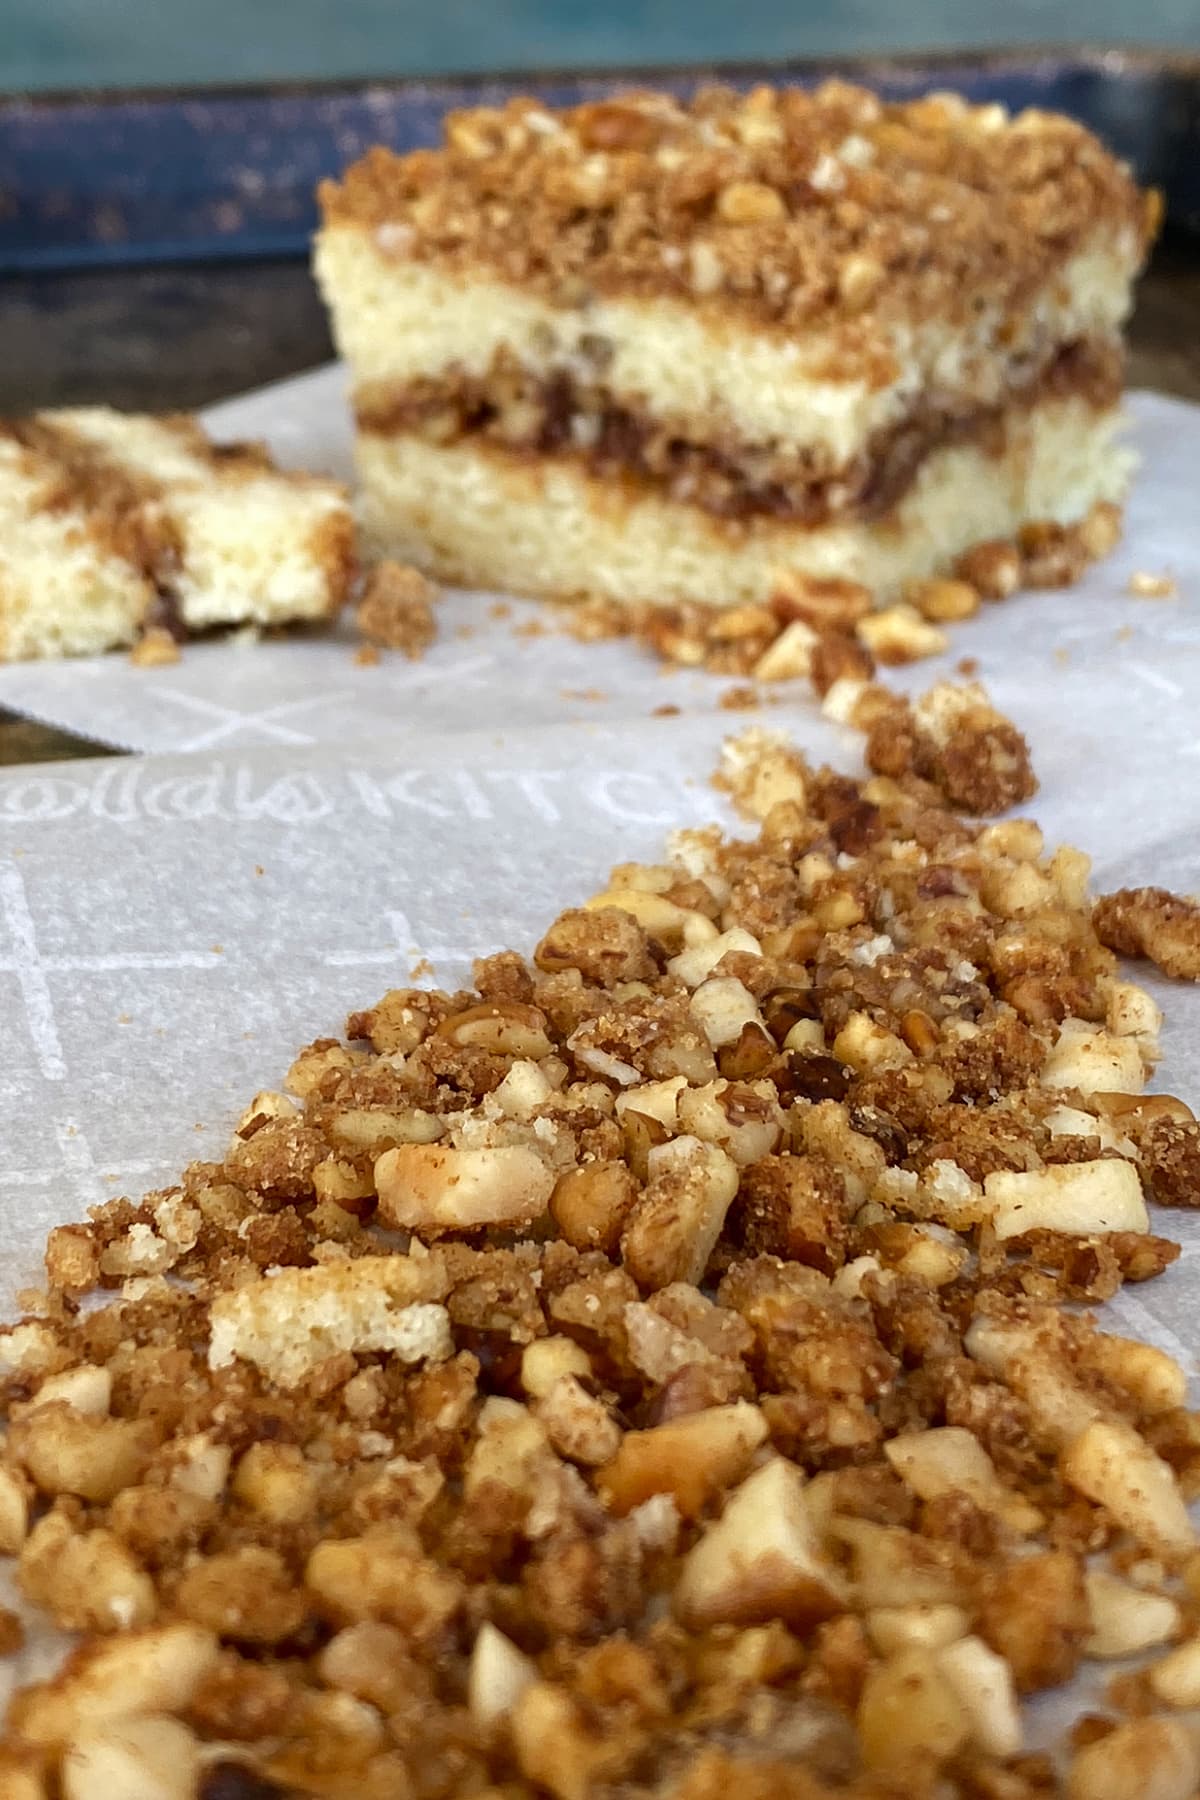 Nut streusel strewn in foreground leading to a cut square of streusel topped coffee cake in the background.